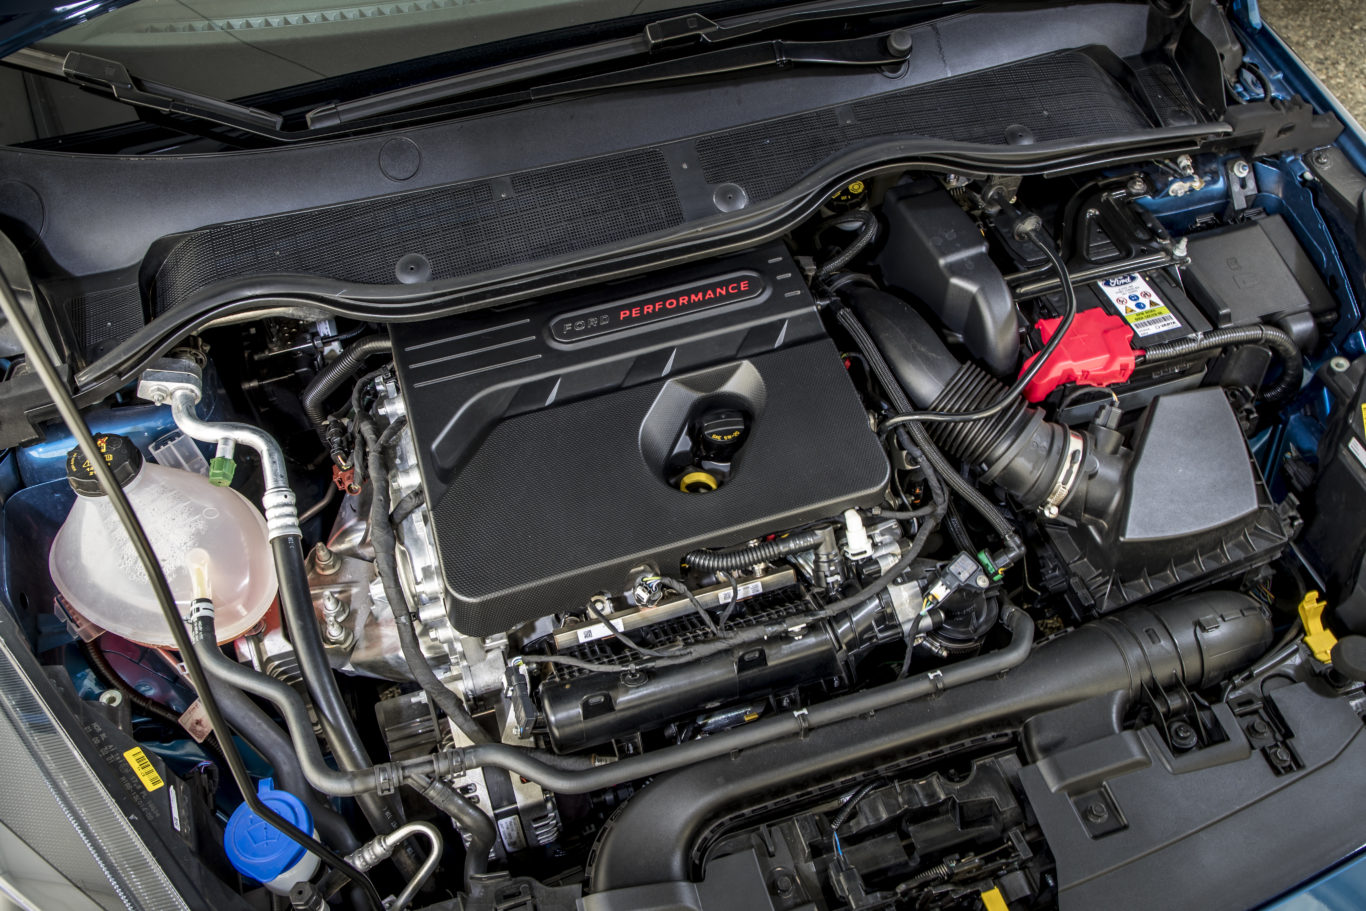 The car's compact engine is surprisingly punchy